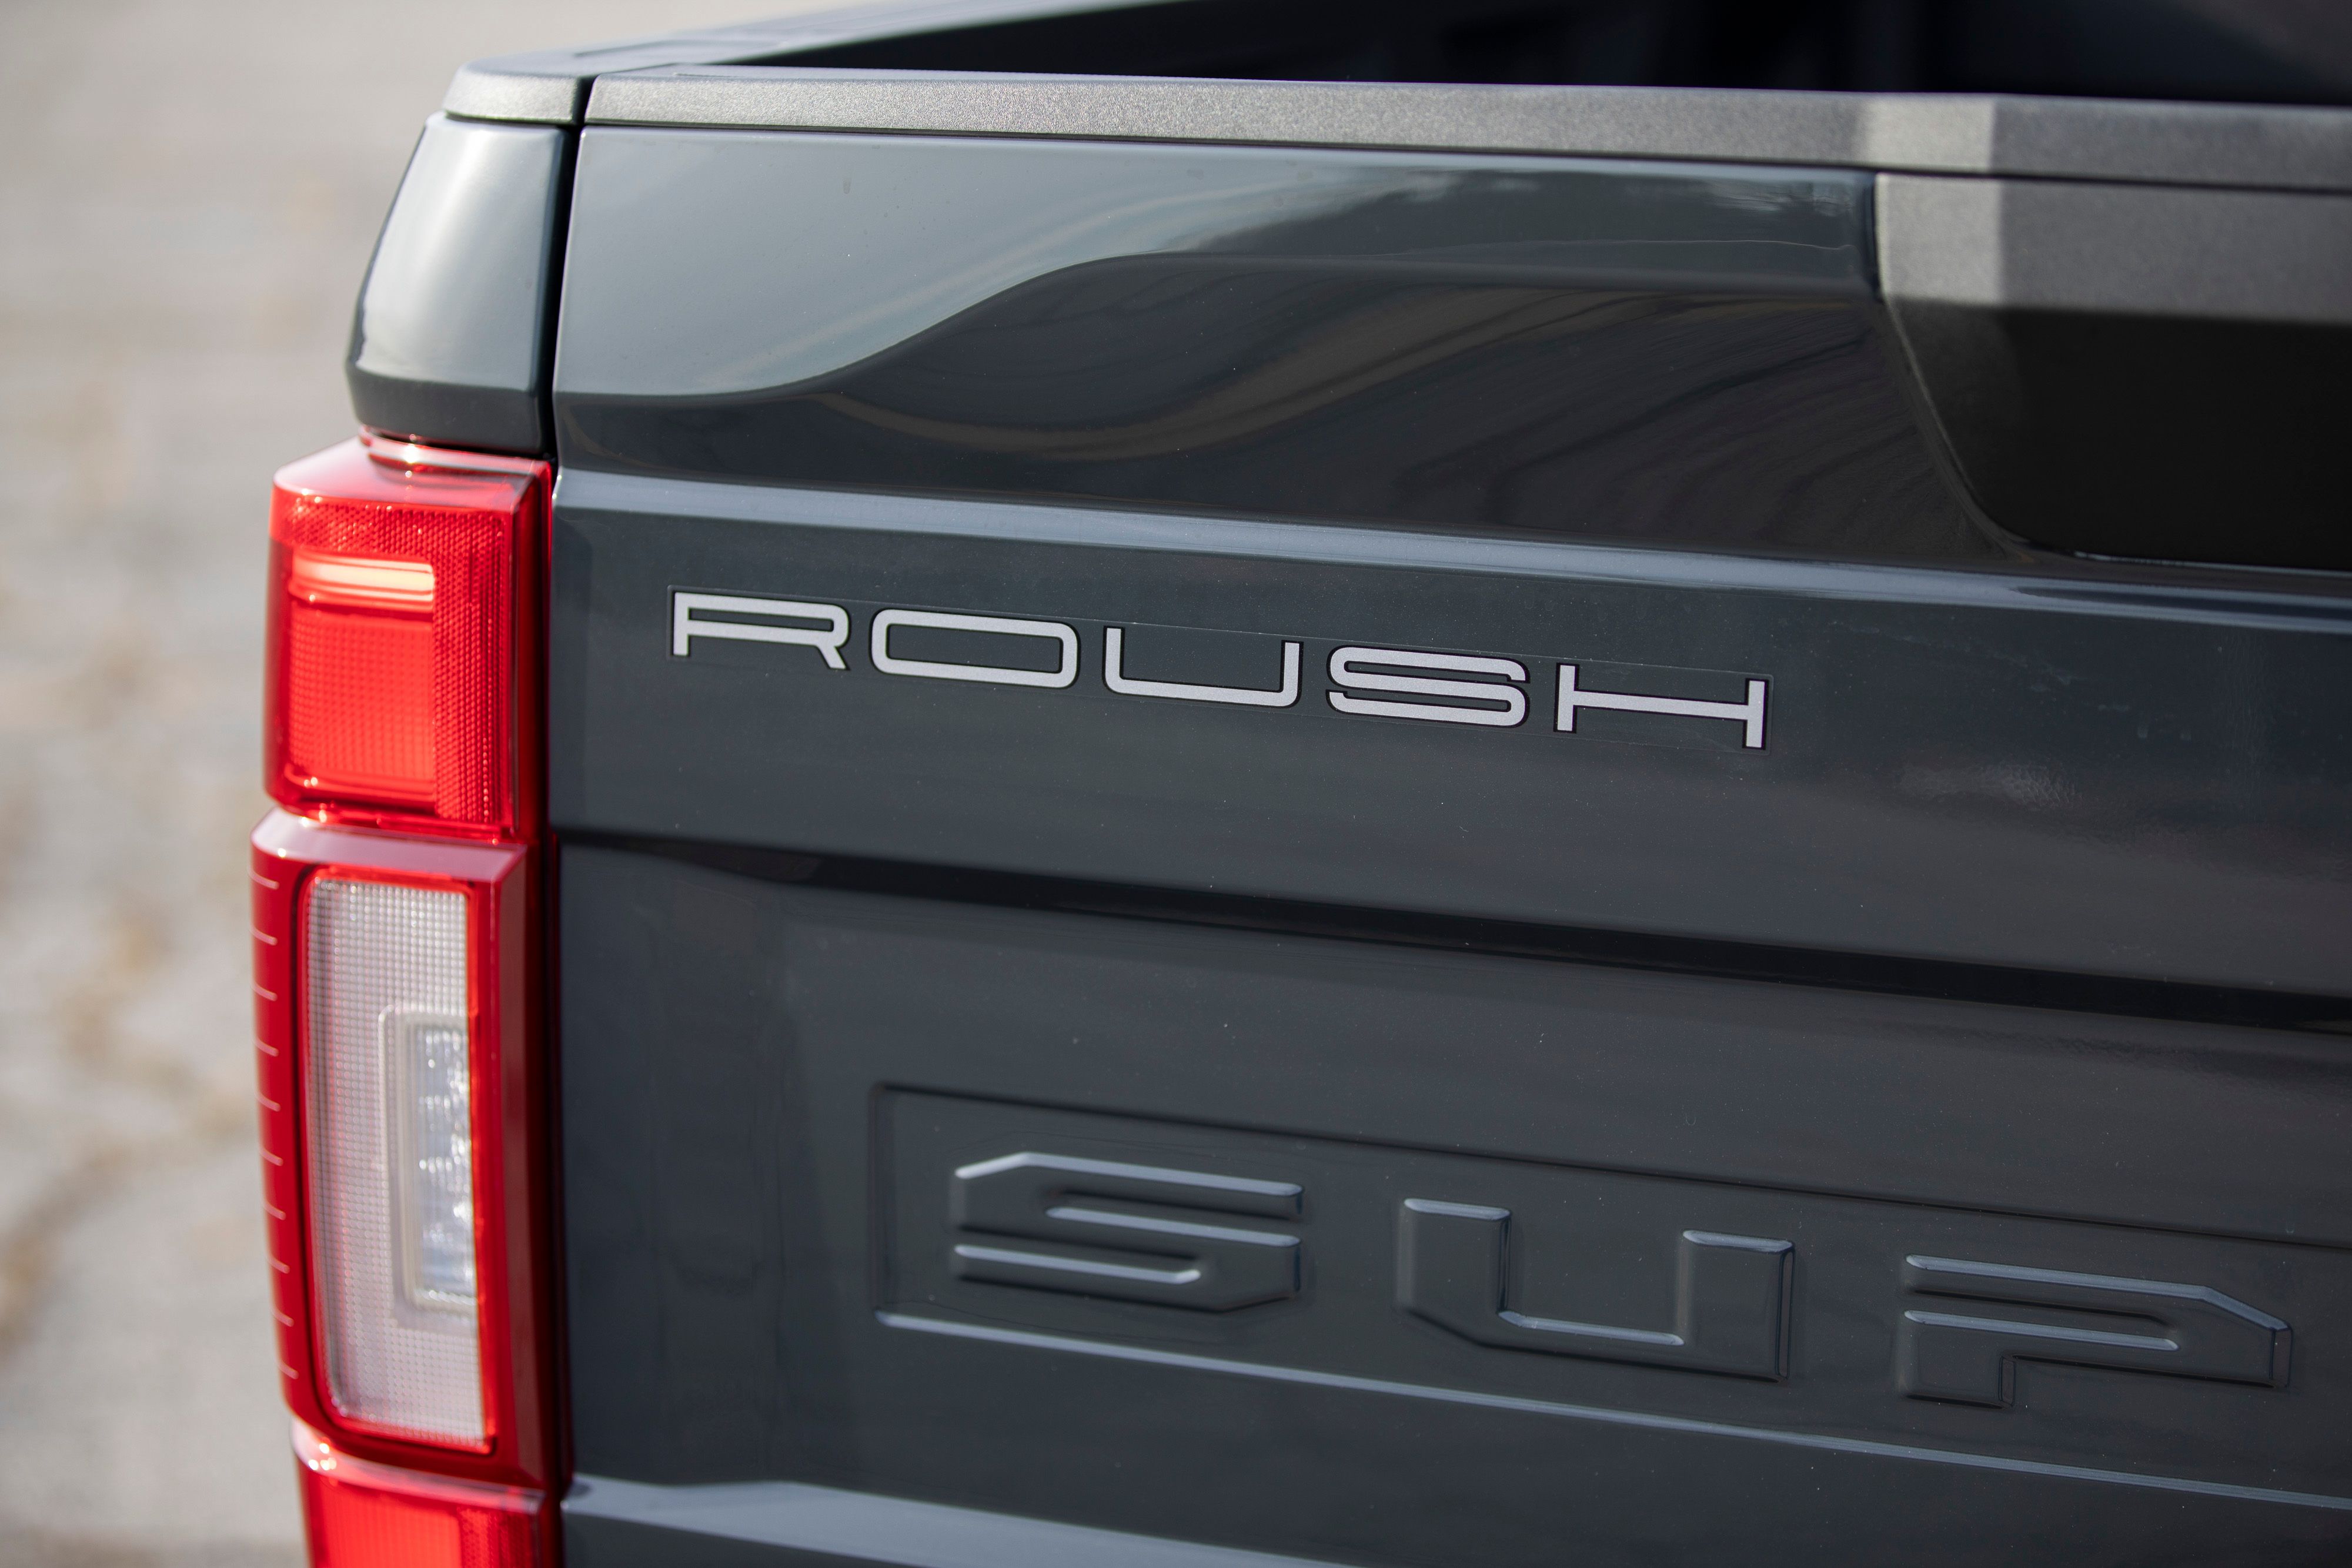 2021 Ford Super Duty By Roush Performance